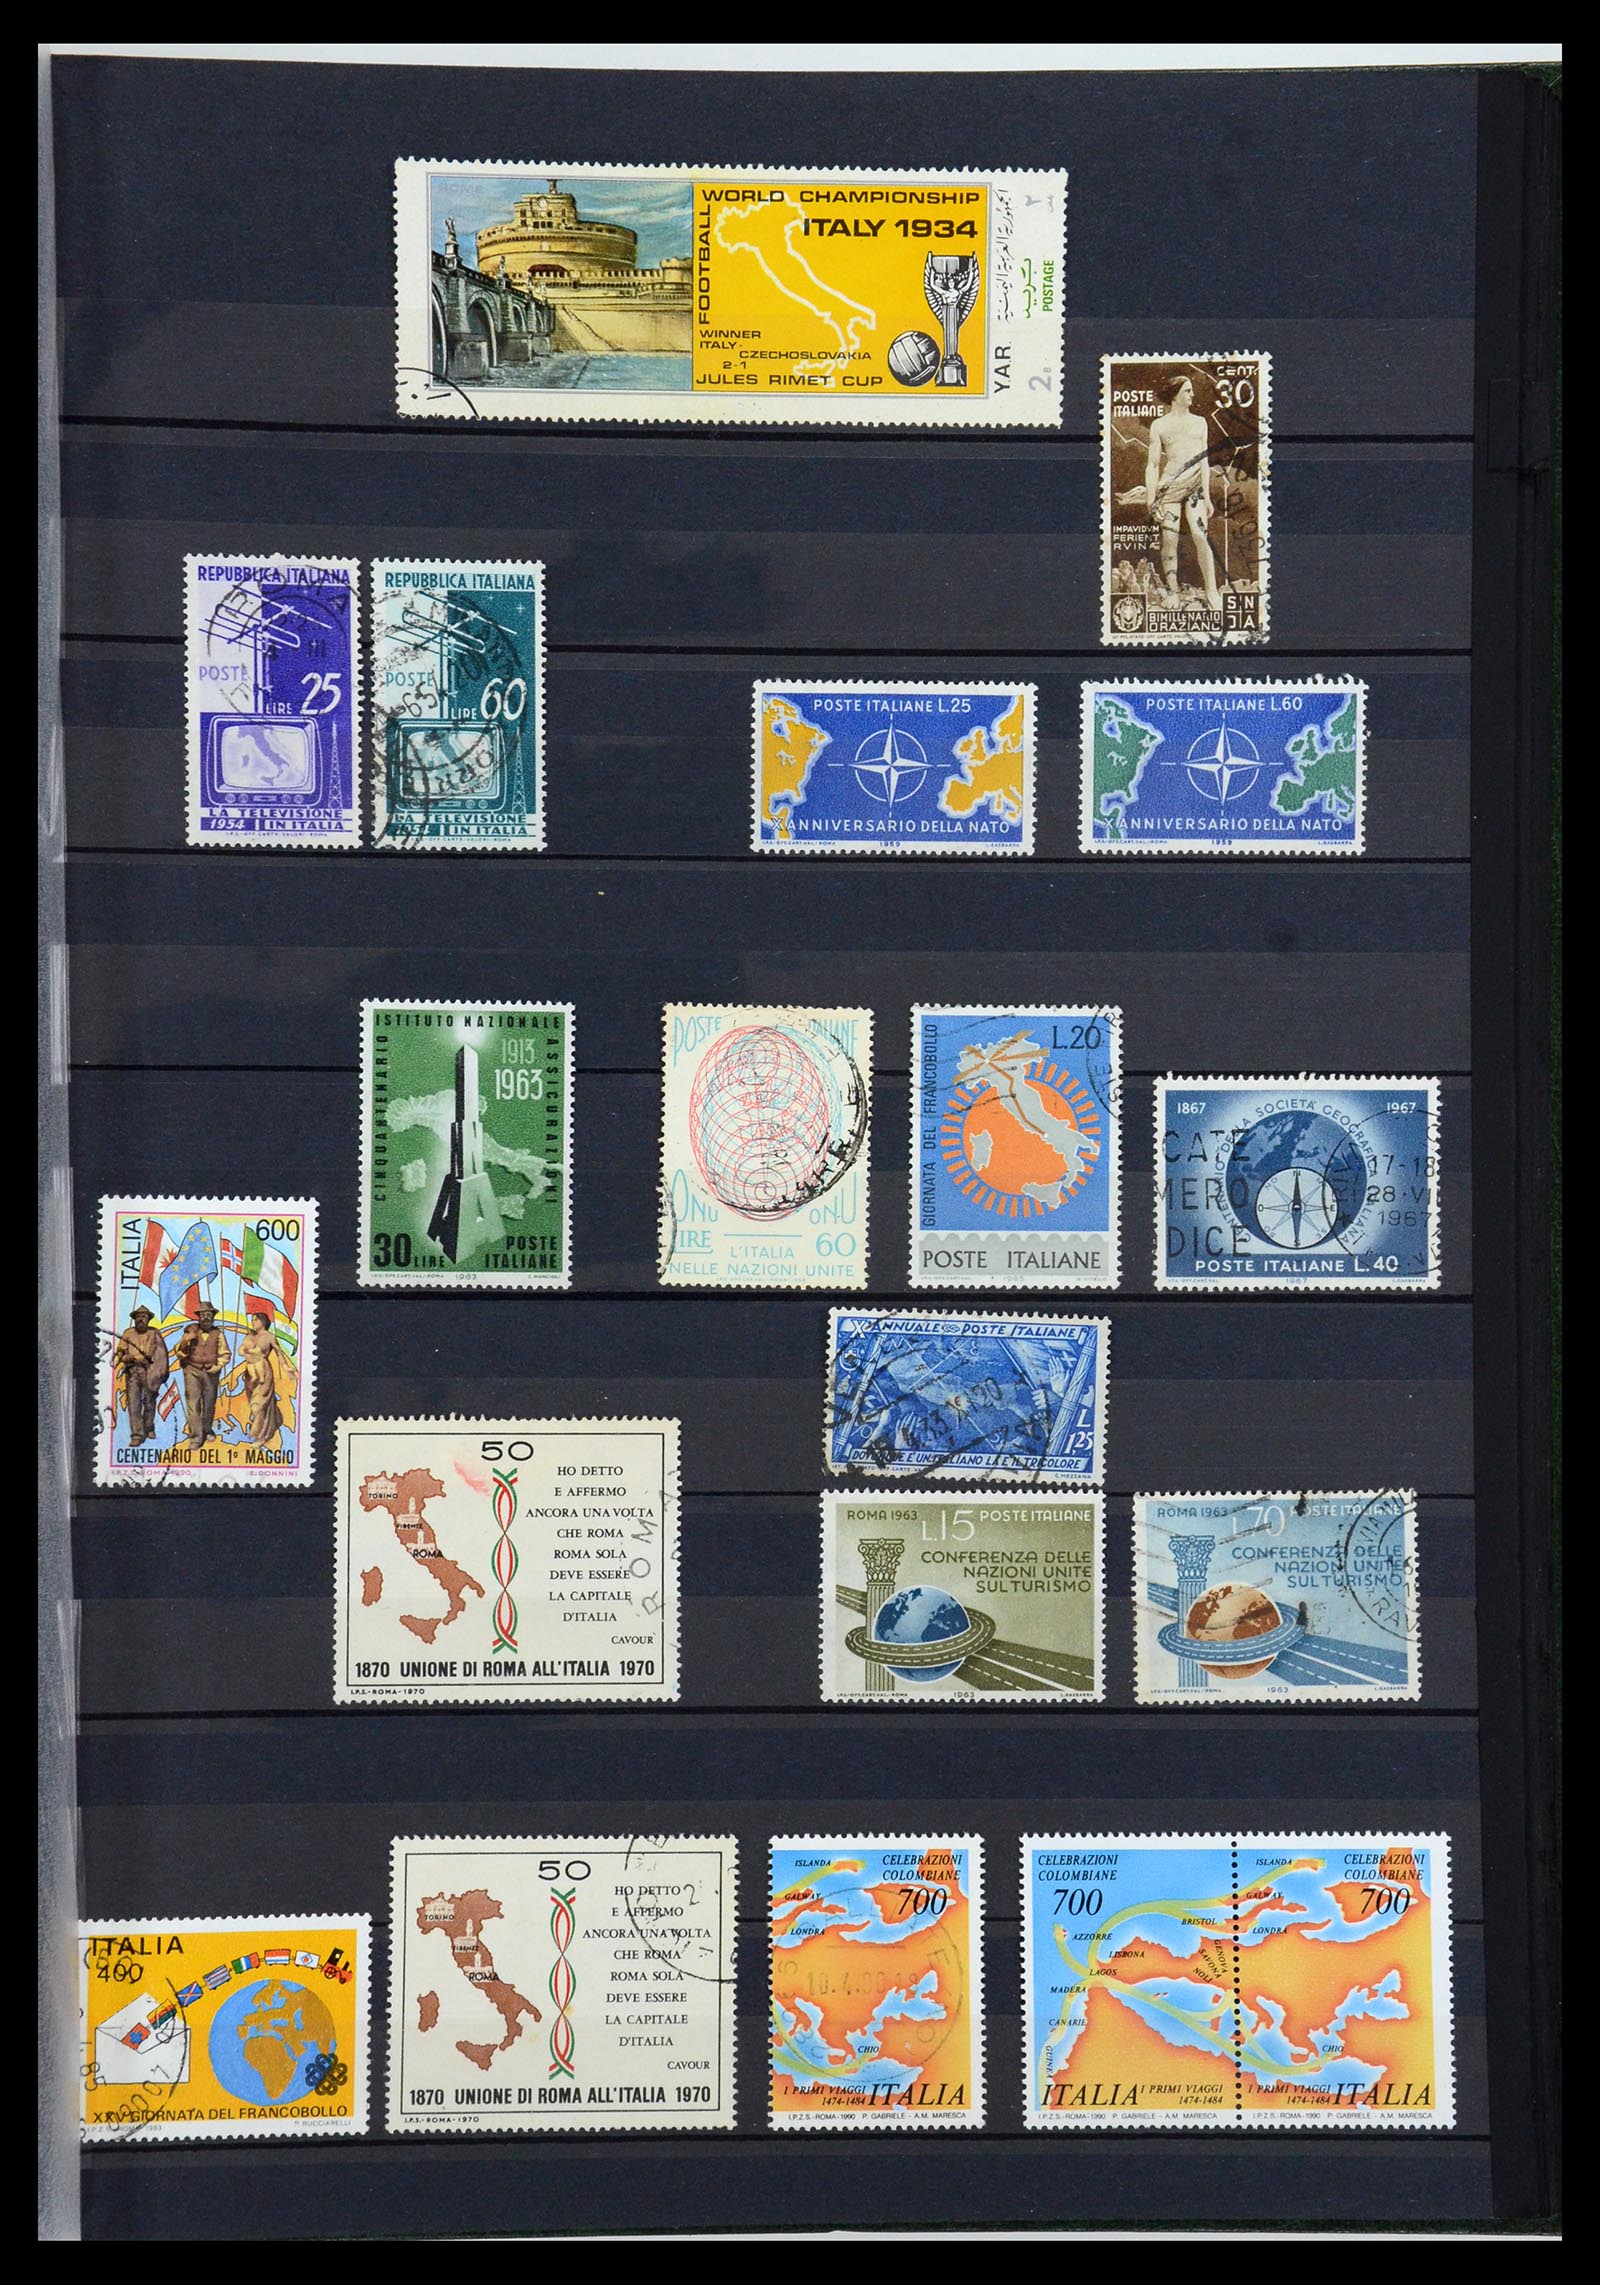 36238 033 - Stamp collection 36238 Motif maps 1900-2000.